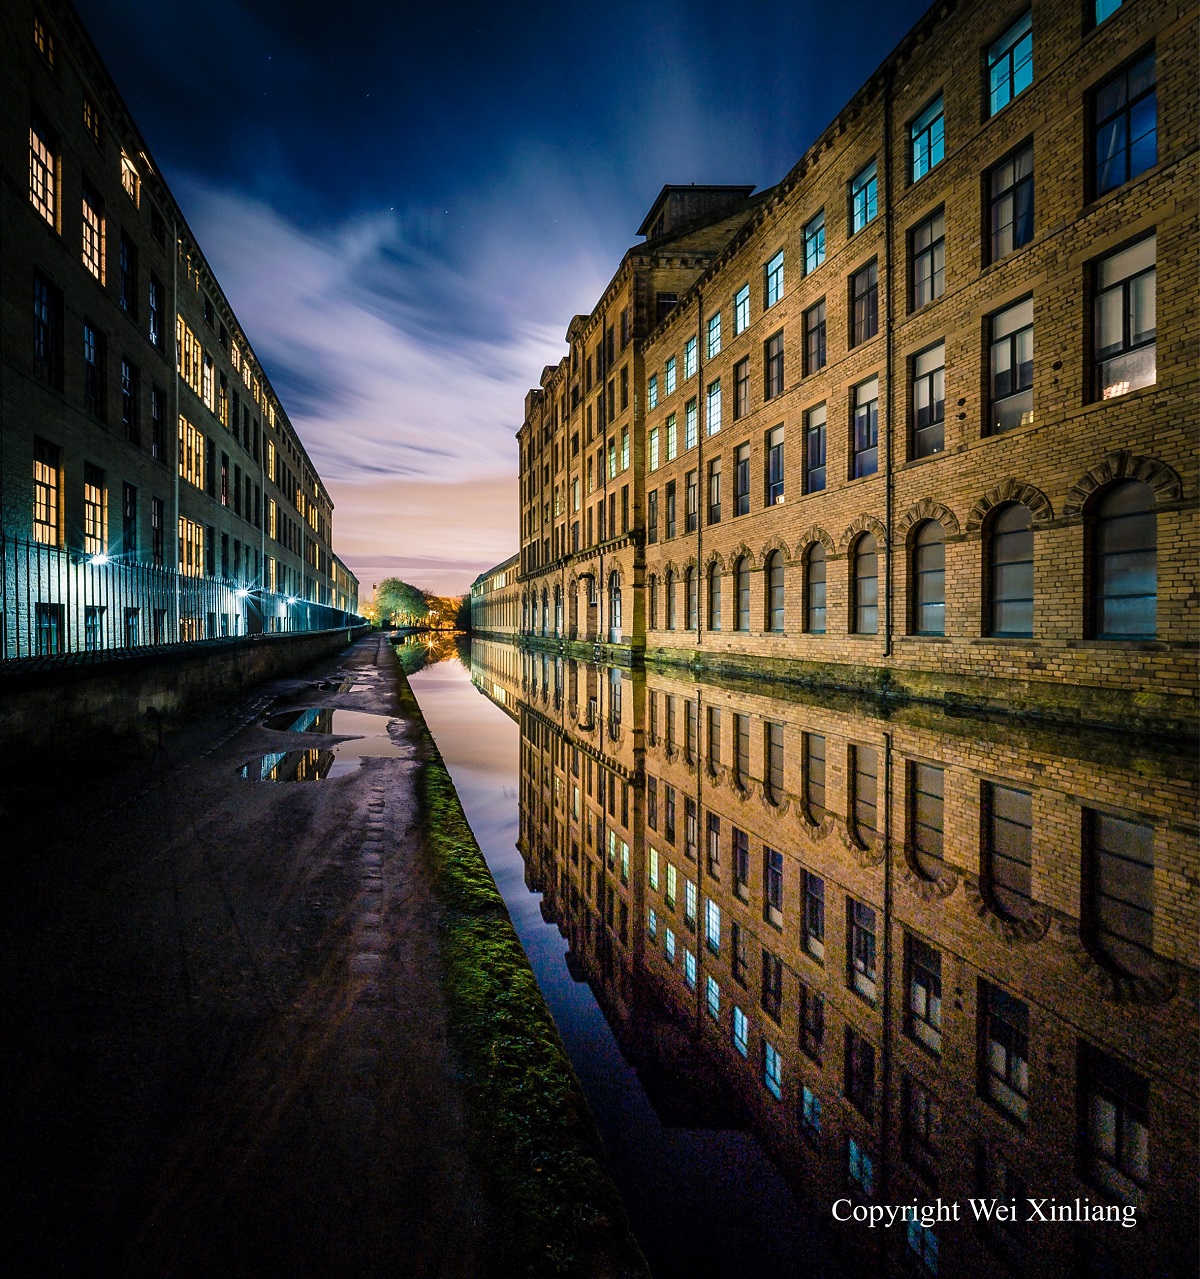 https://saltairevillage.info/images_architecture/Salts_Mill_Wei_Xinliang.jpg